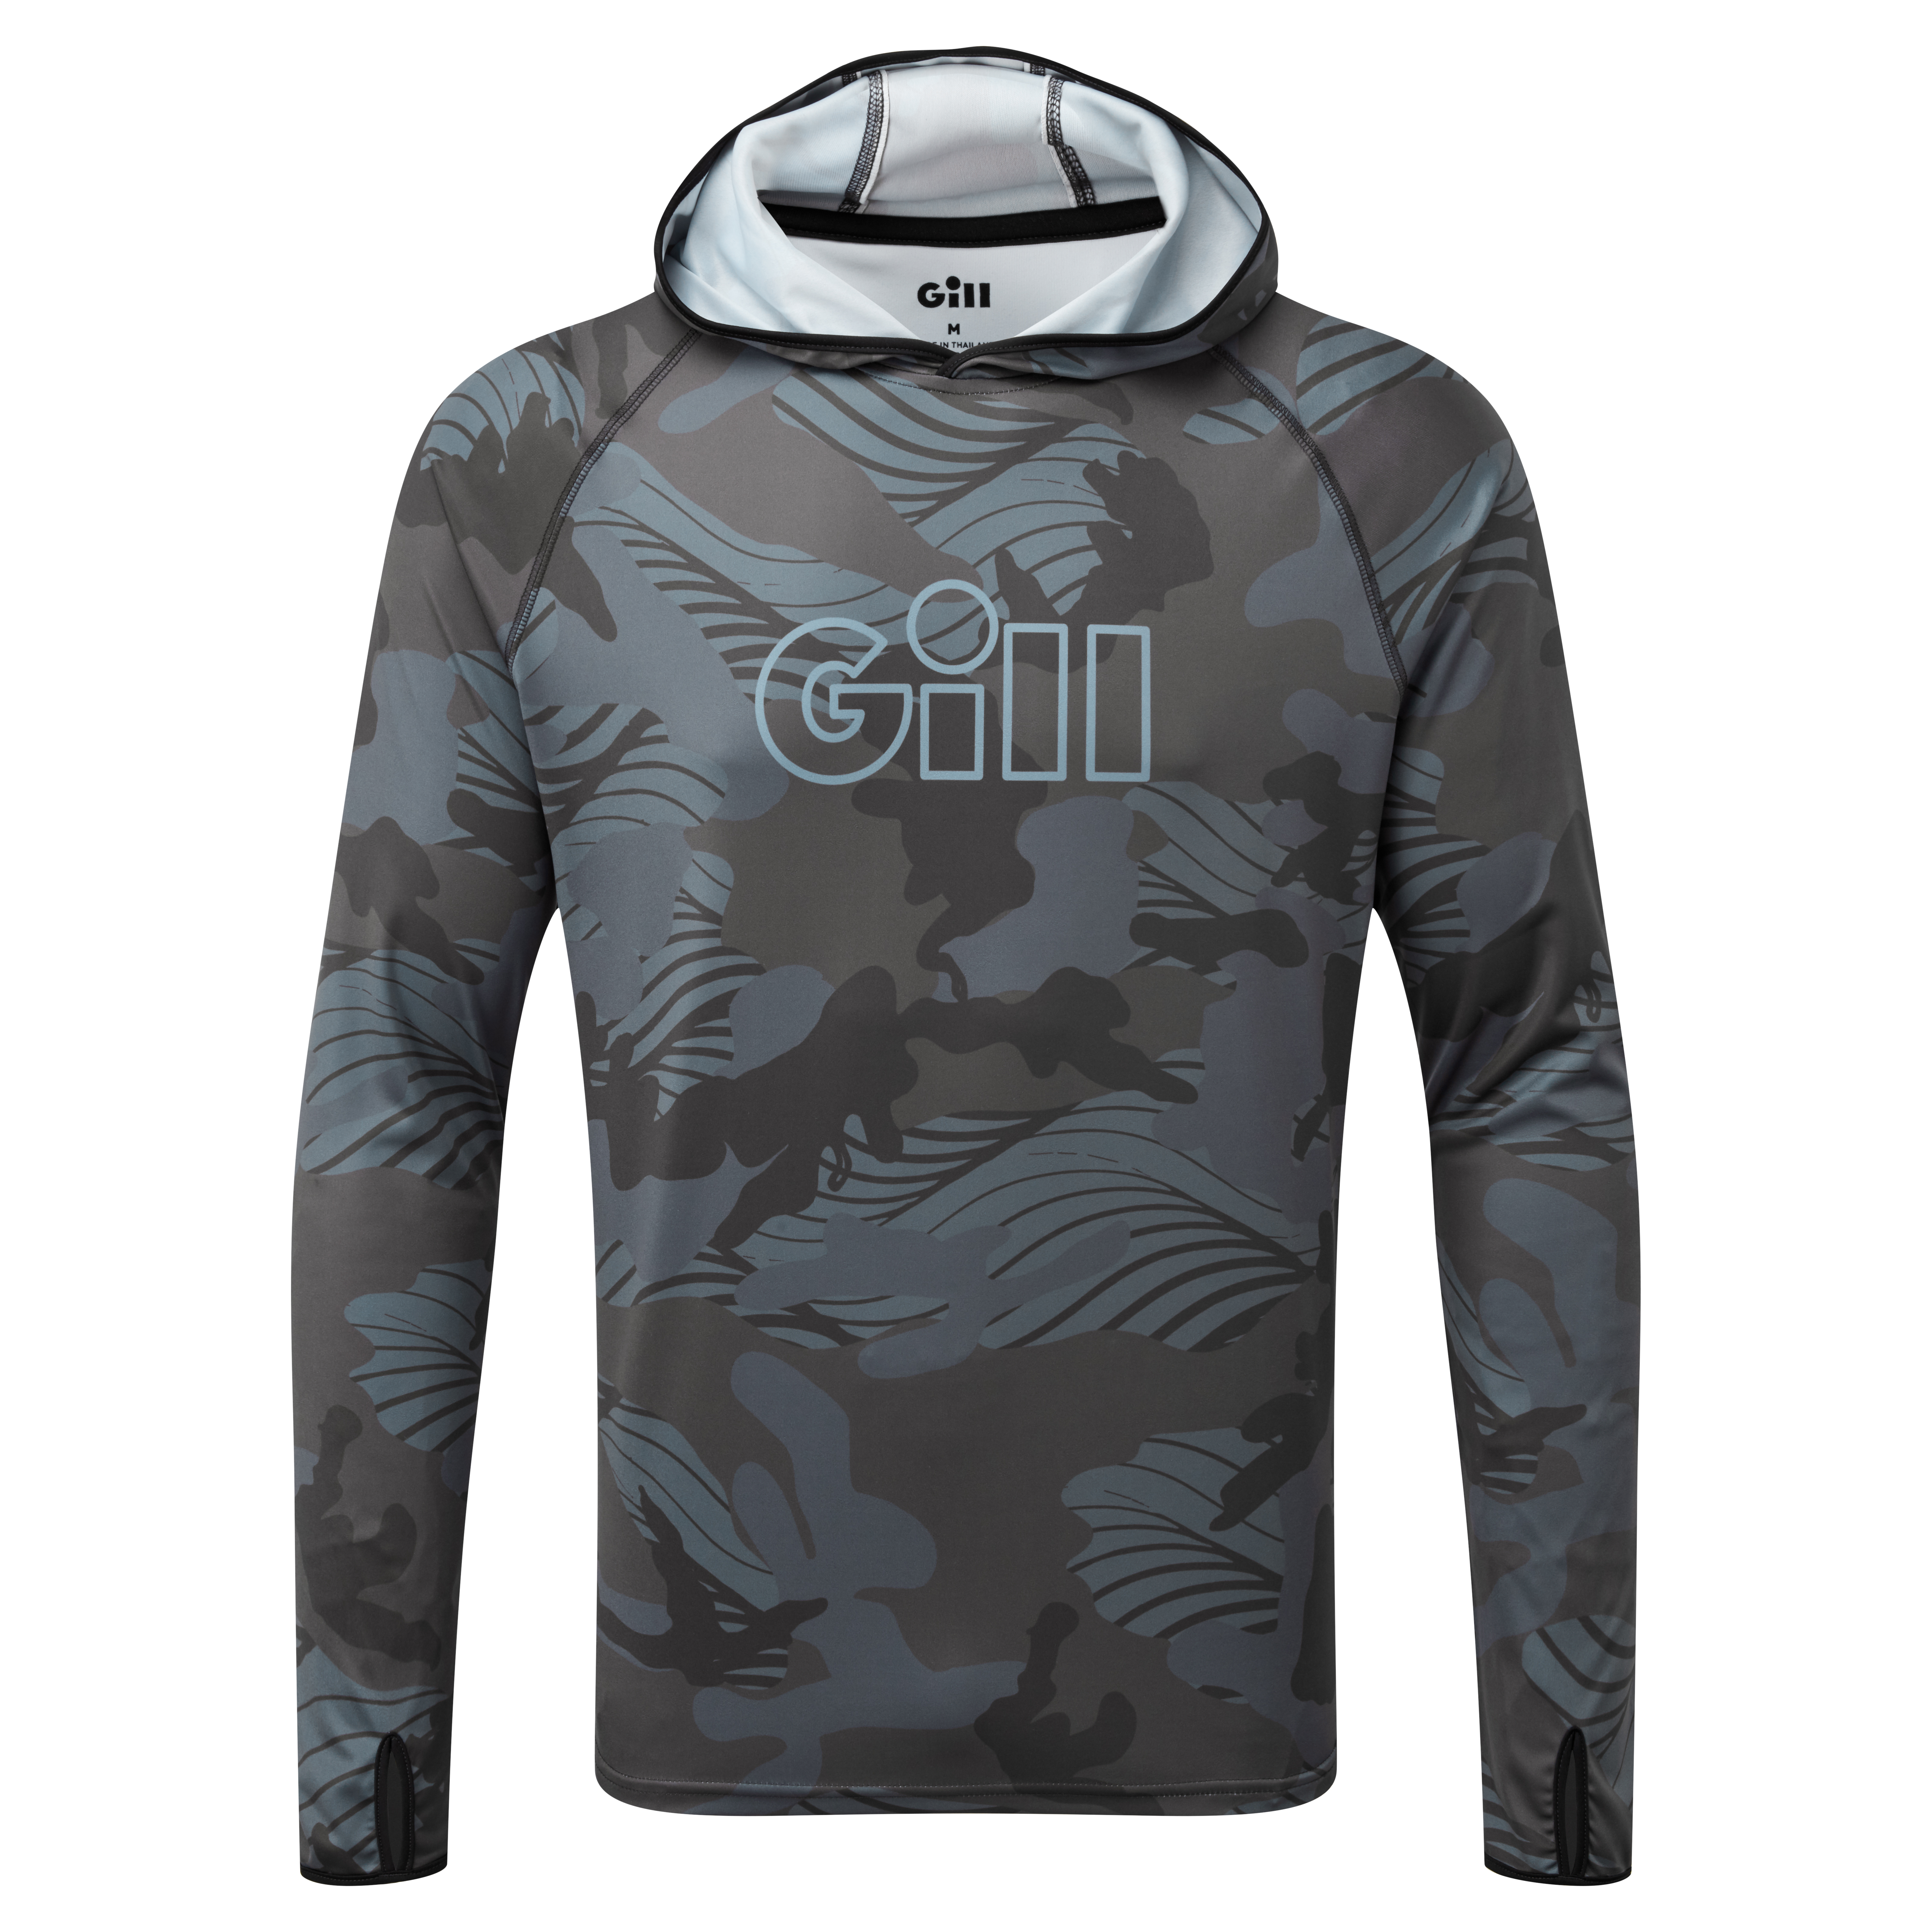 Look Fresh, Stay Cool with Gill Fishing's New XPEL Tec Collection